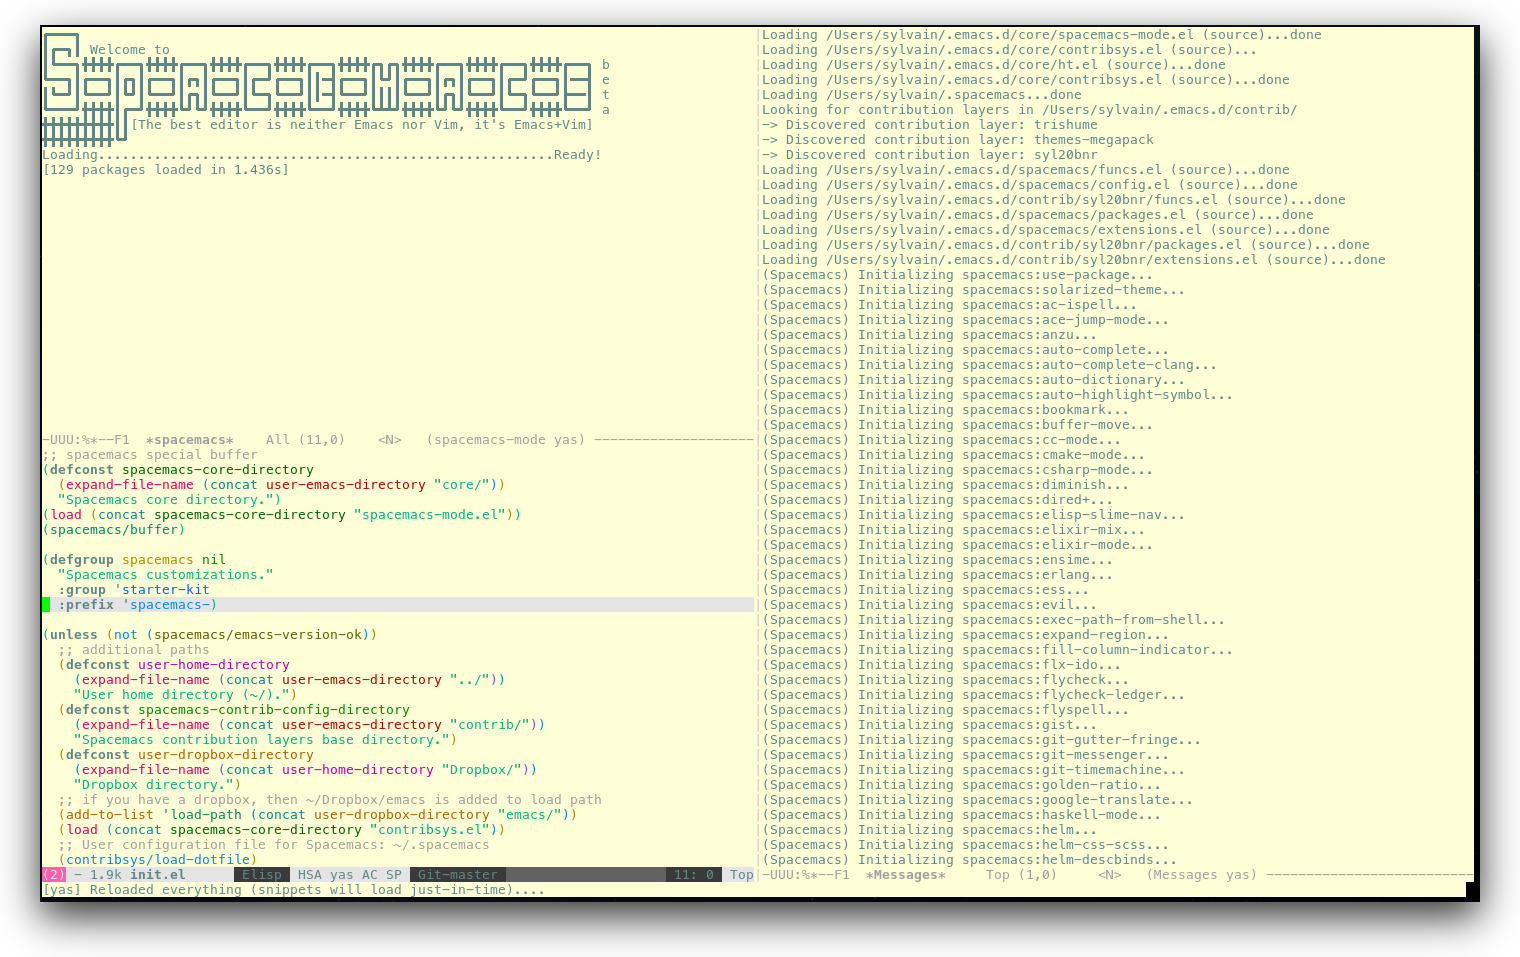 /TakeV/spacemacs/media/commit/a358eb01540f24f9827050d1bf779455864091ef/doc/img/spacemacs-urxvt.png